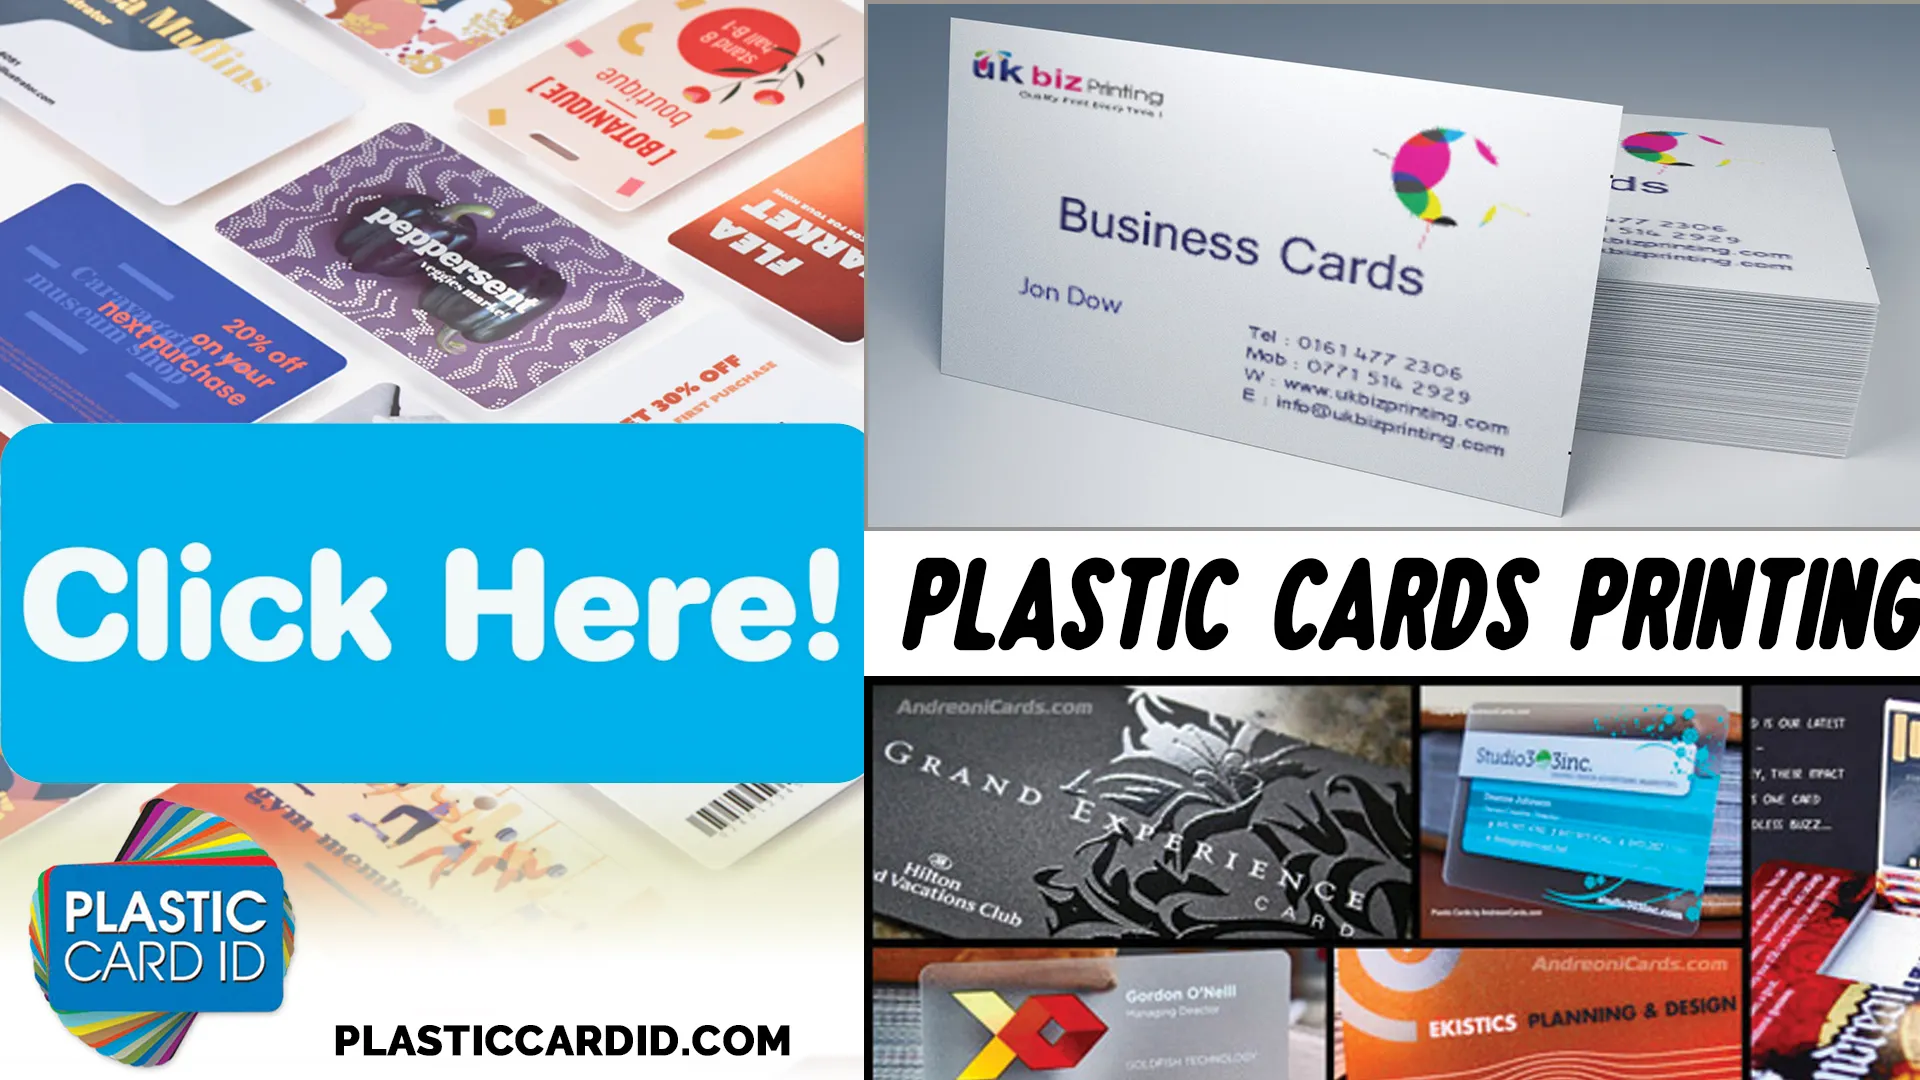 Extending Our Services with Card Printers and Refills